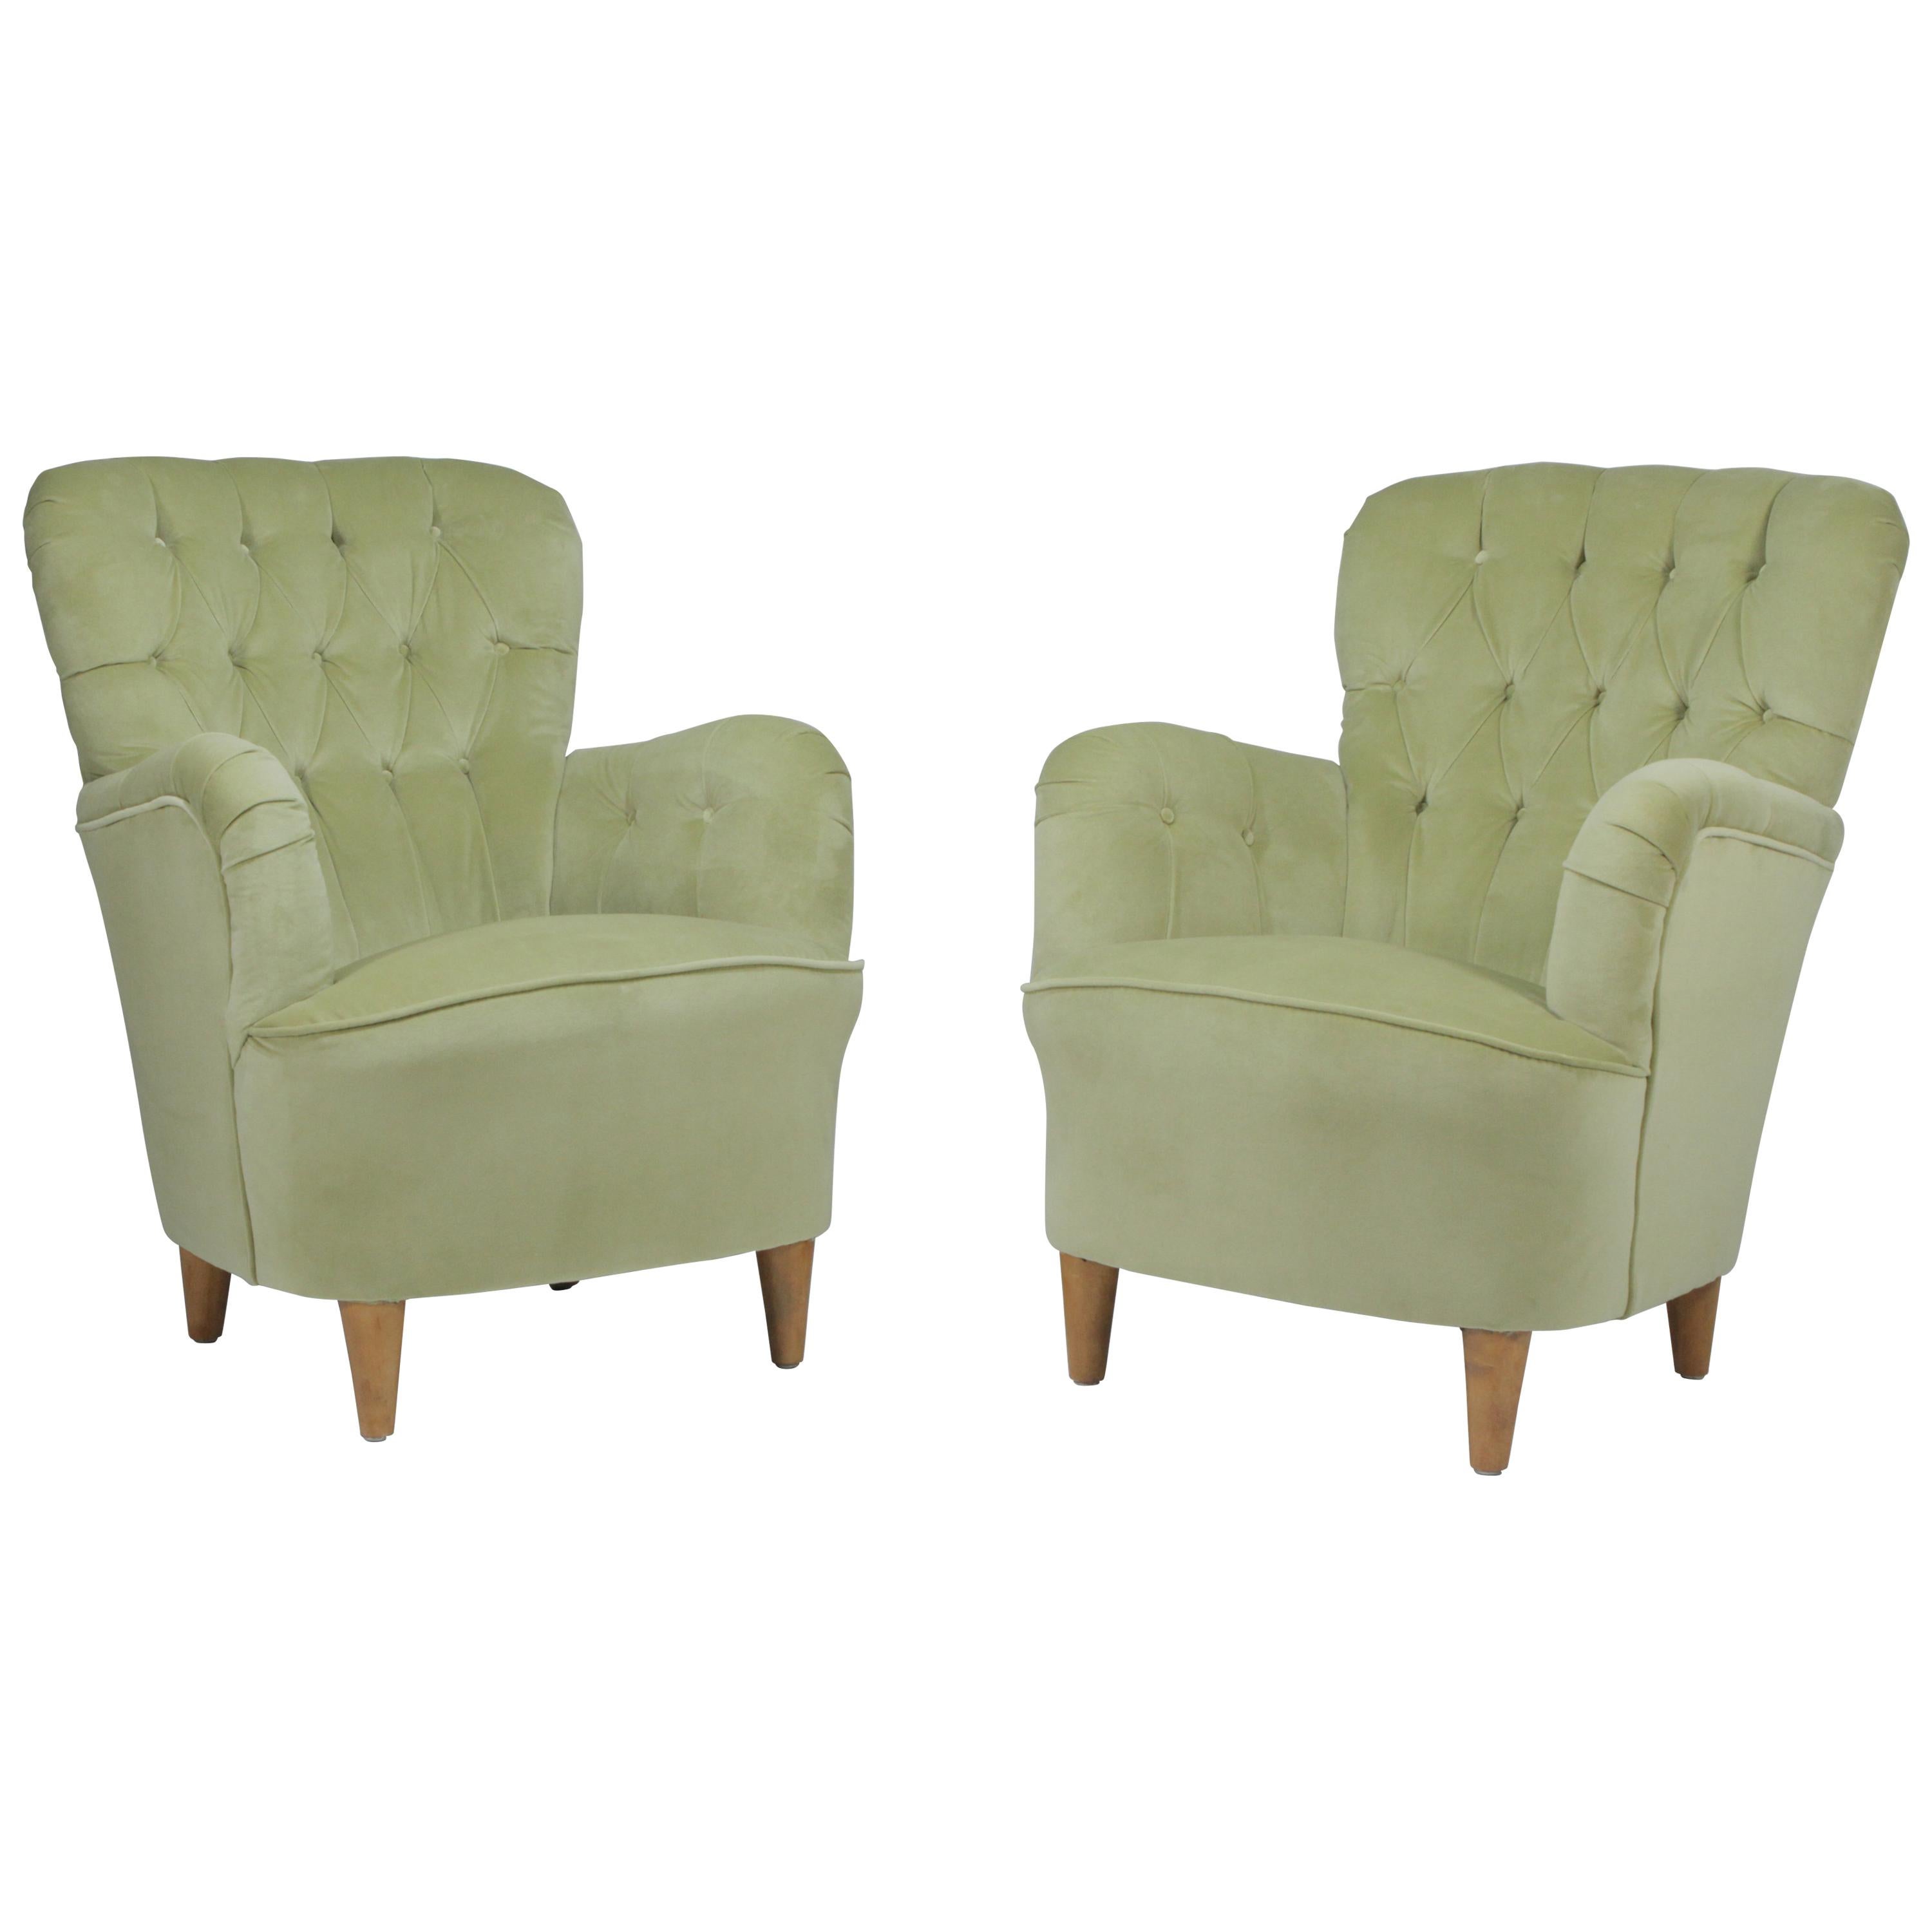 Iconic Pair of Swedish Club Chairs Attributed to Elias Svedberg For Sale